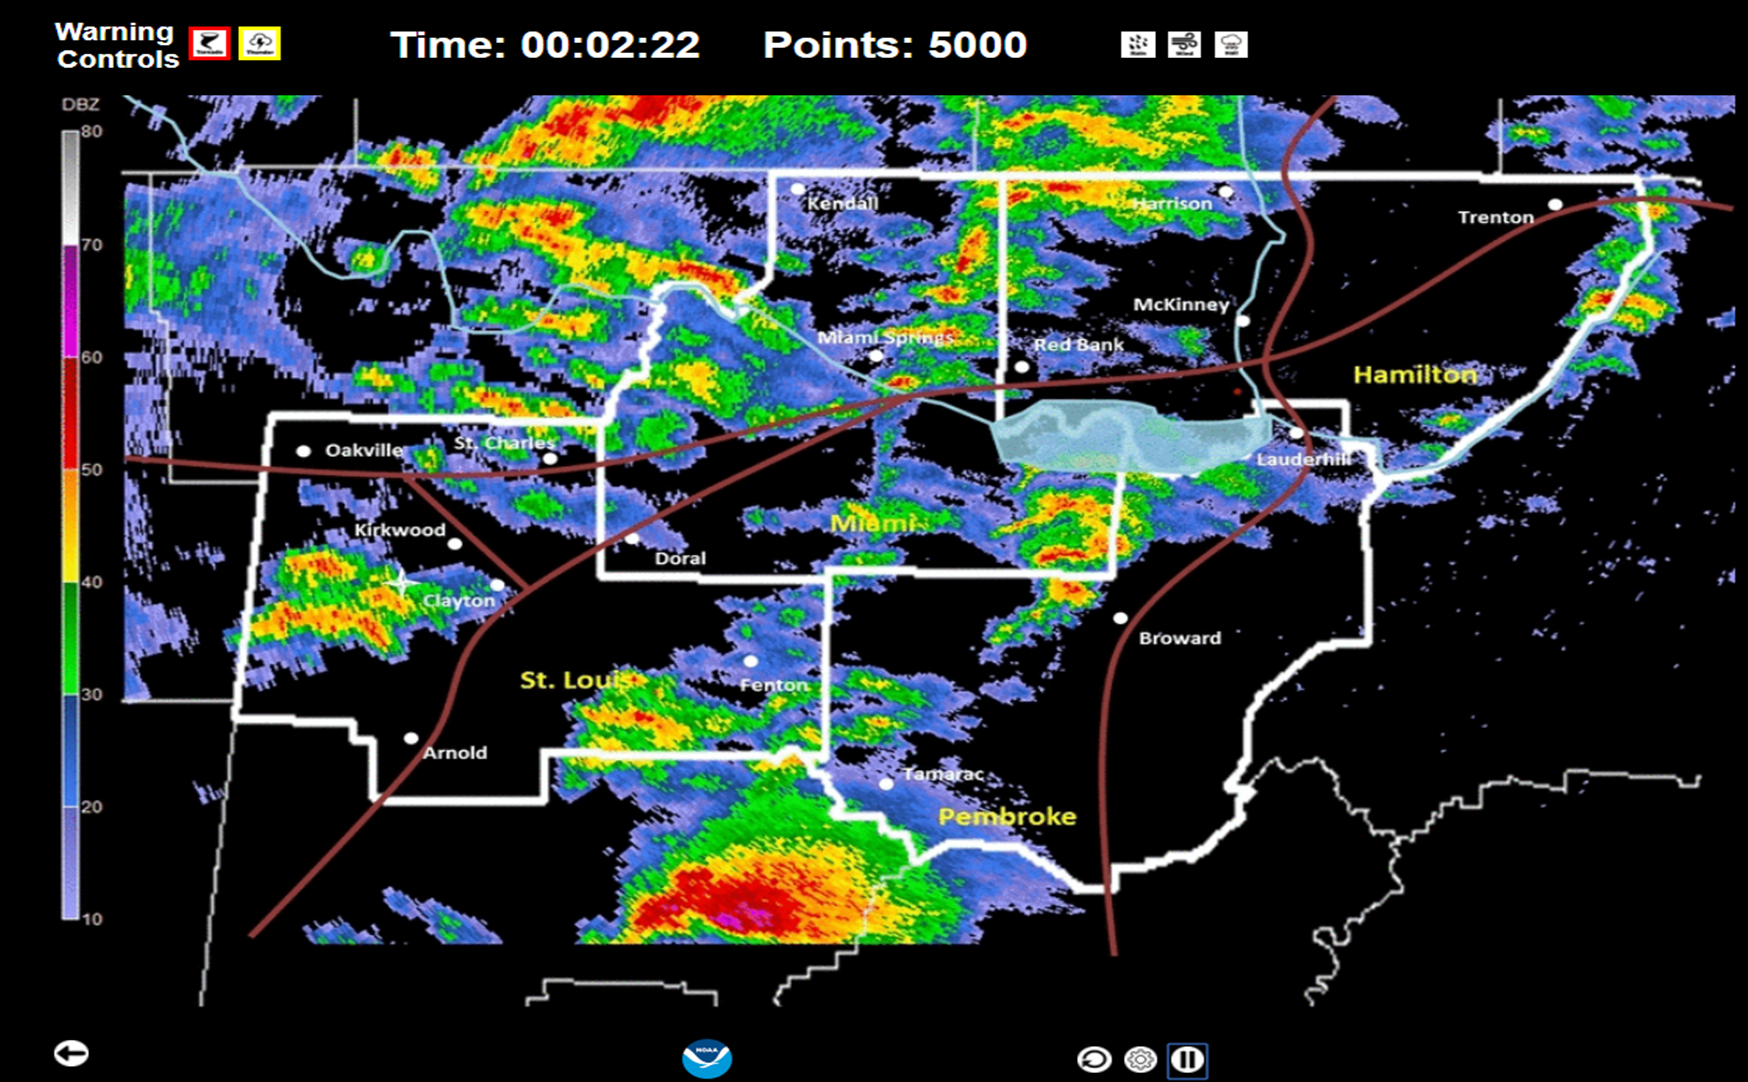 HotSeat uses archived Weather
Surveillance Radar (WSR-88D) data to
simulate a forecast scenario.